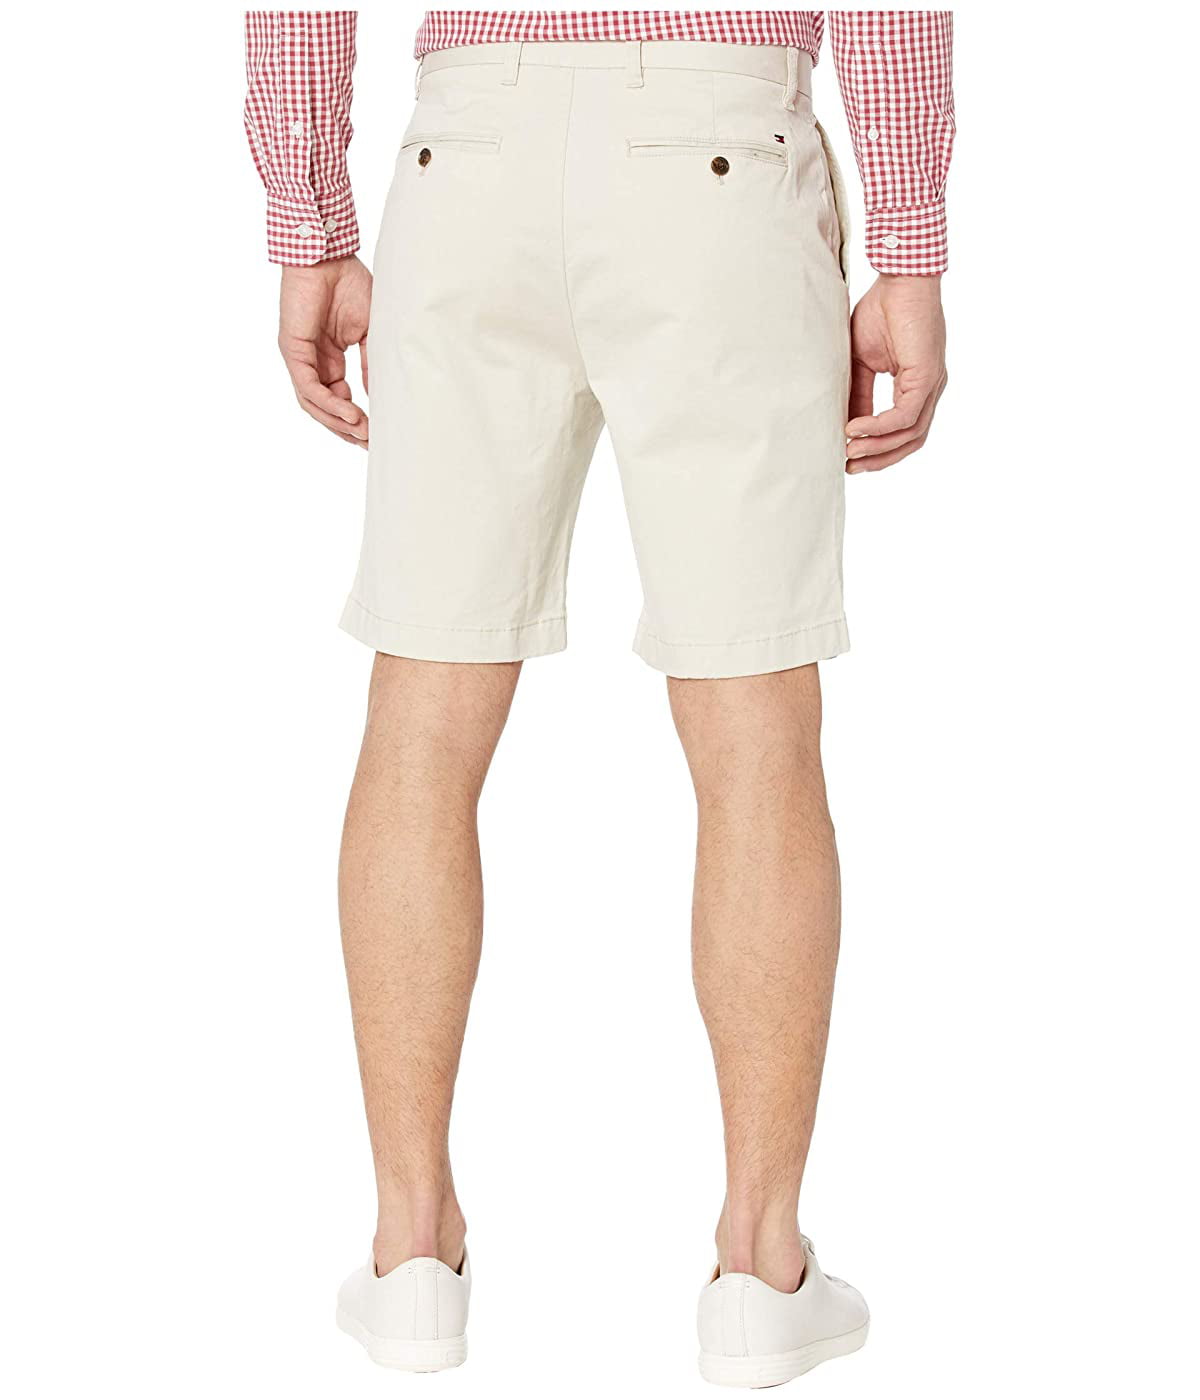 Tommy Hilfiger Mens Flat Front Chino Shorts New Without Tags 